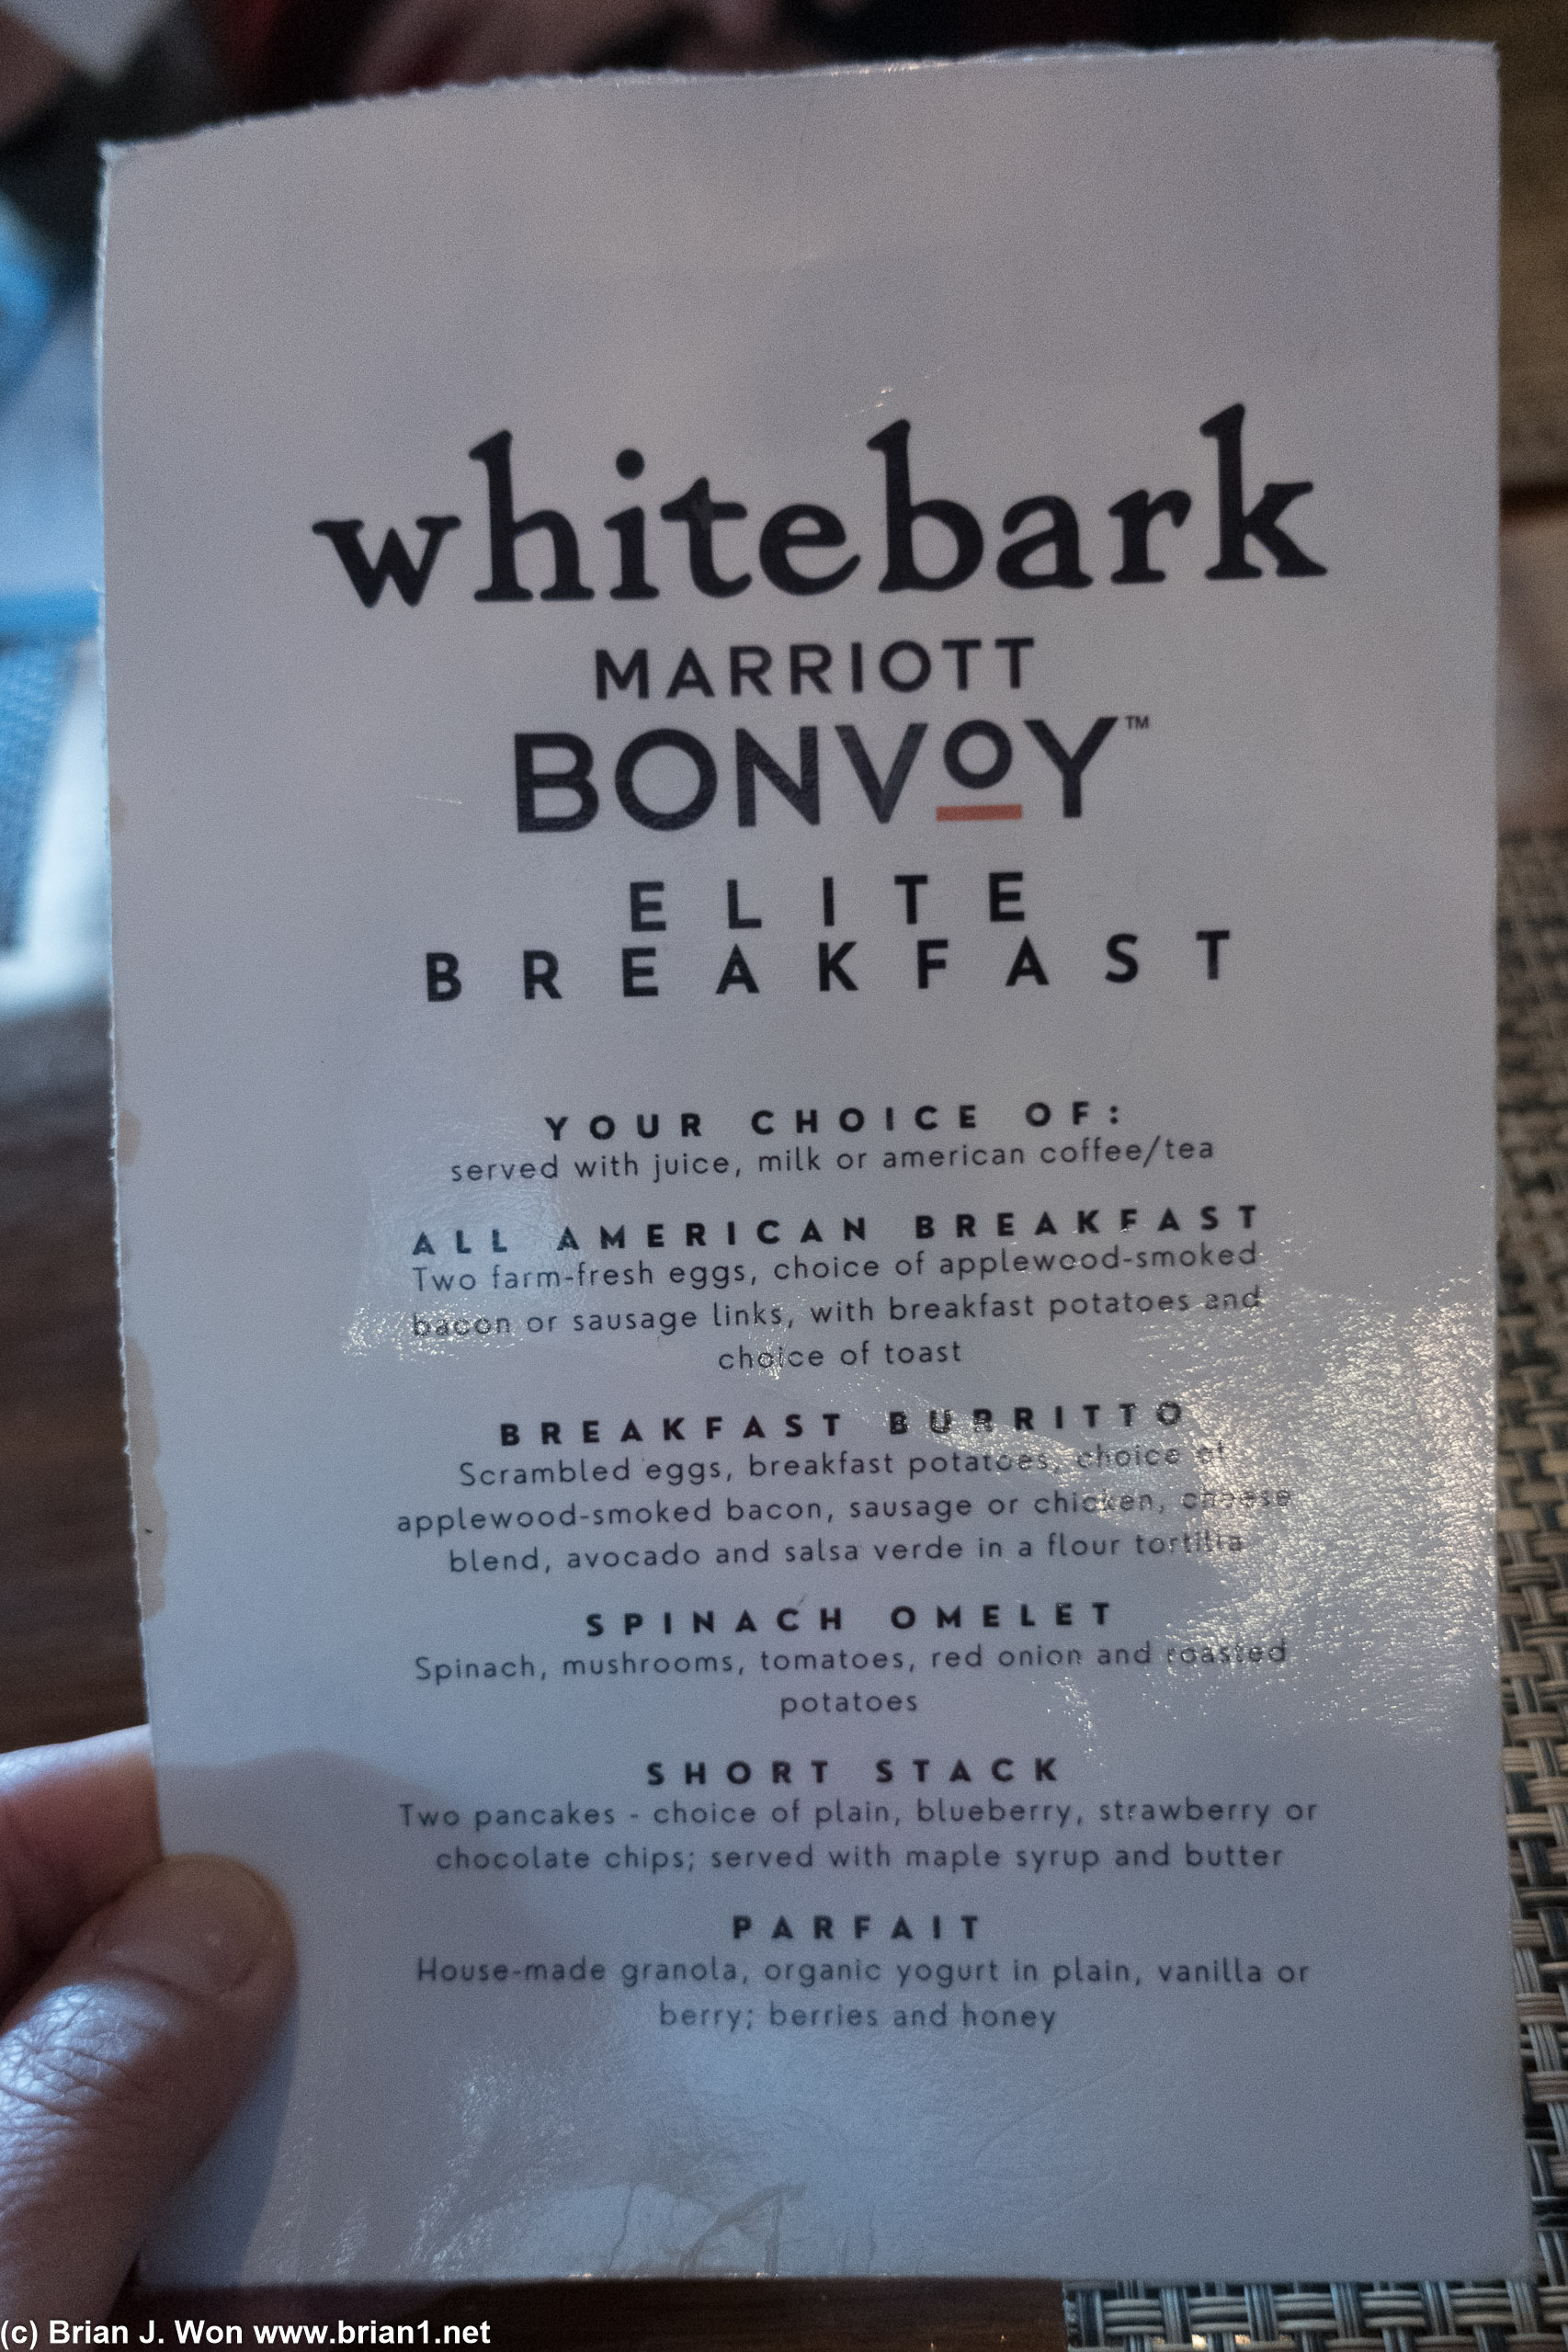 The complimentary breakfast menu is half the size of the full menu. WTF.